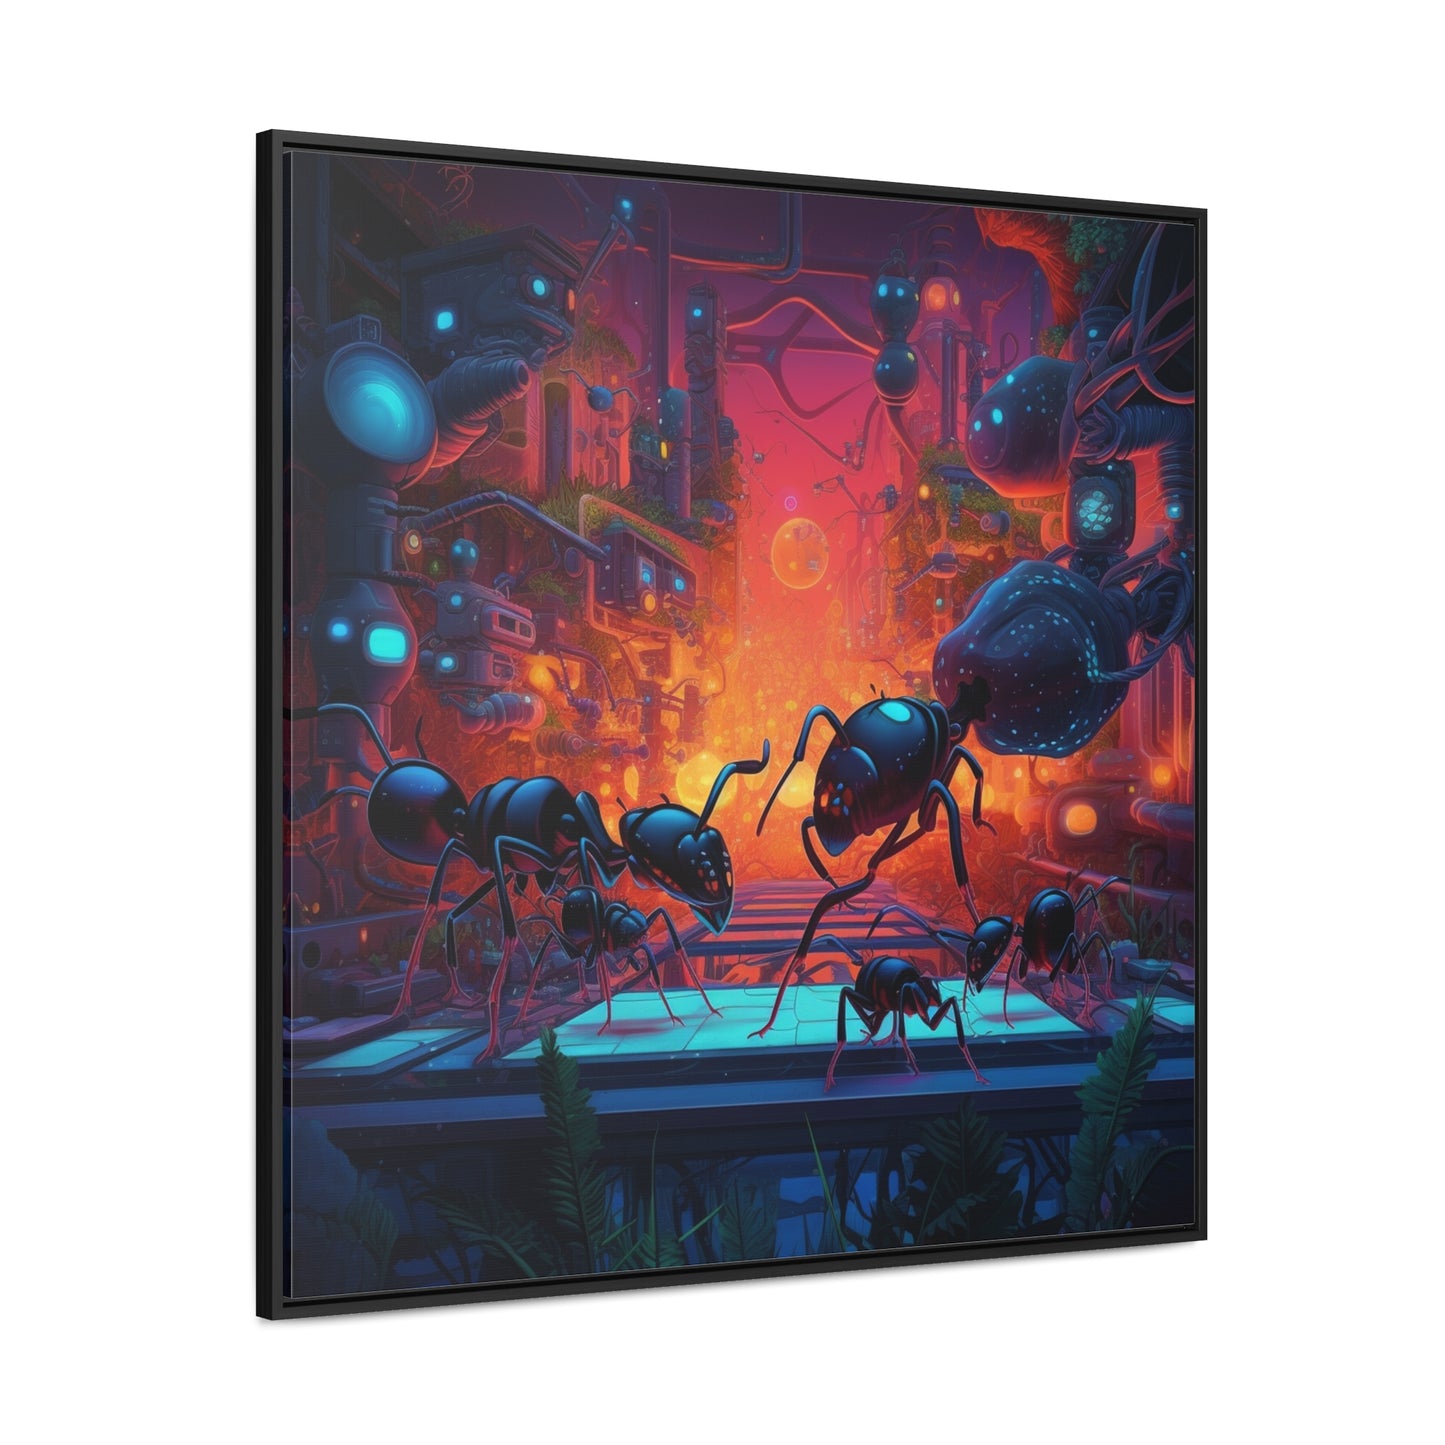 Gallery Canvas Wraps, Square Frame Ants Home 2